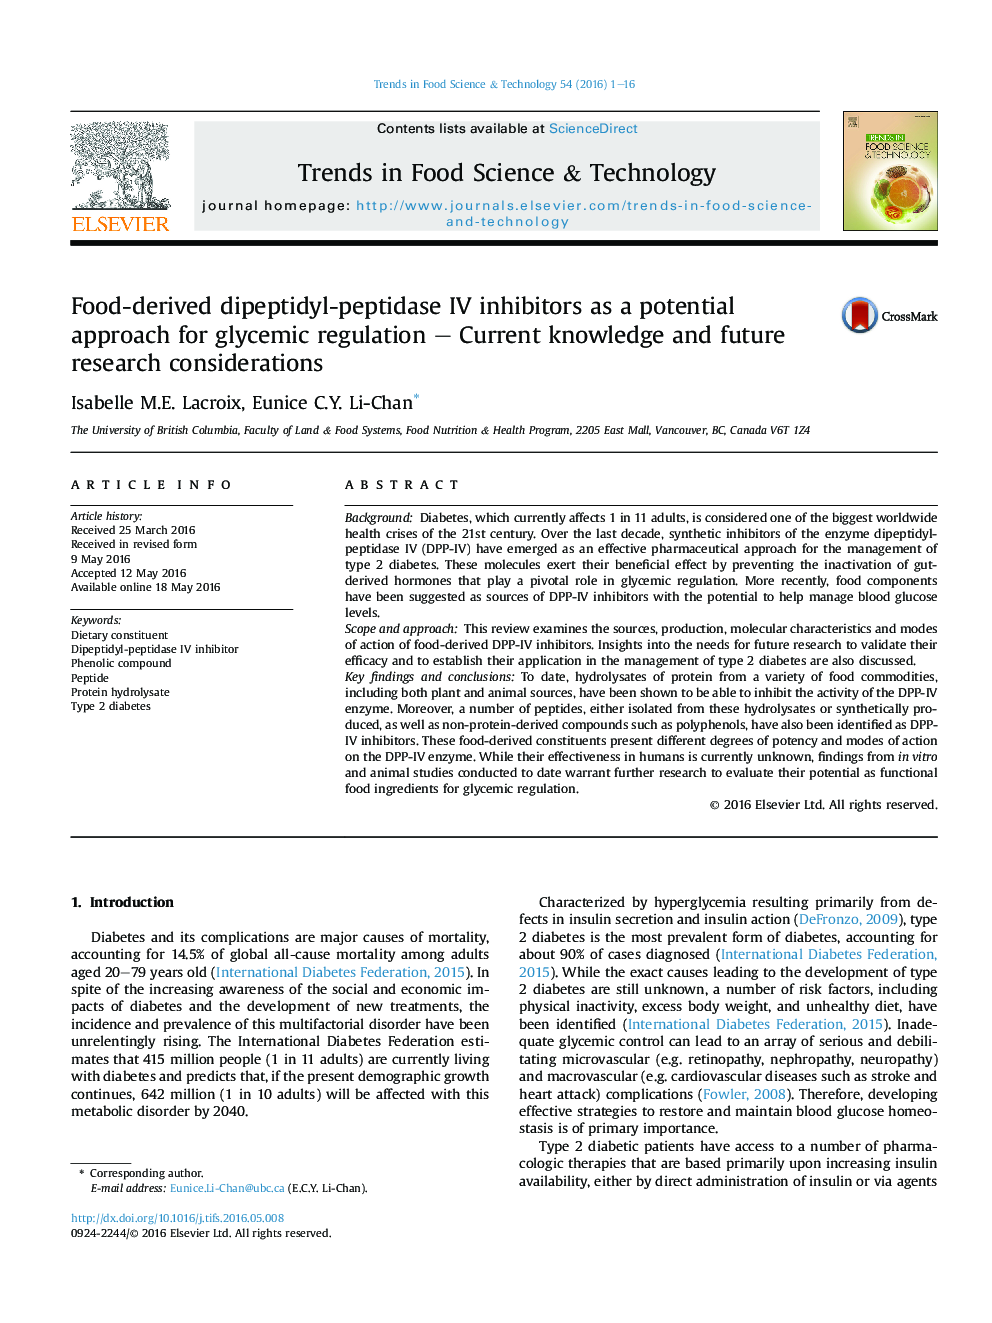 Food-derived dipeptidyl-peptidase IV inhibitors as a potential approach for glycemic regulation – Current knowledge and future research considerations